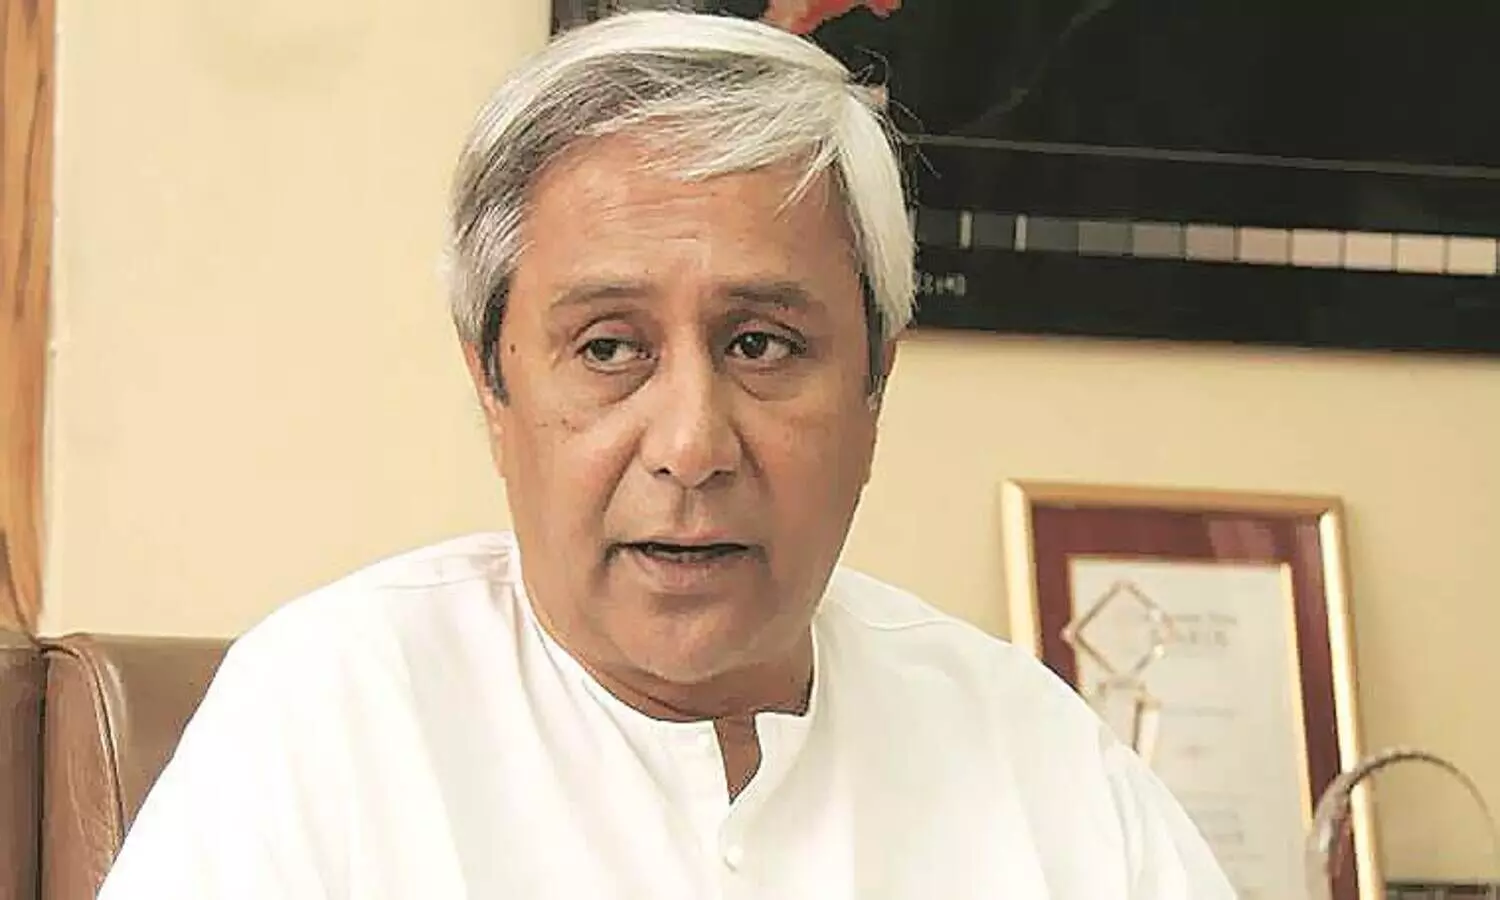 CM Naveen Patnaik said the party give 27 % reservation for OBC in seats while elections